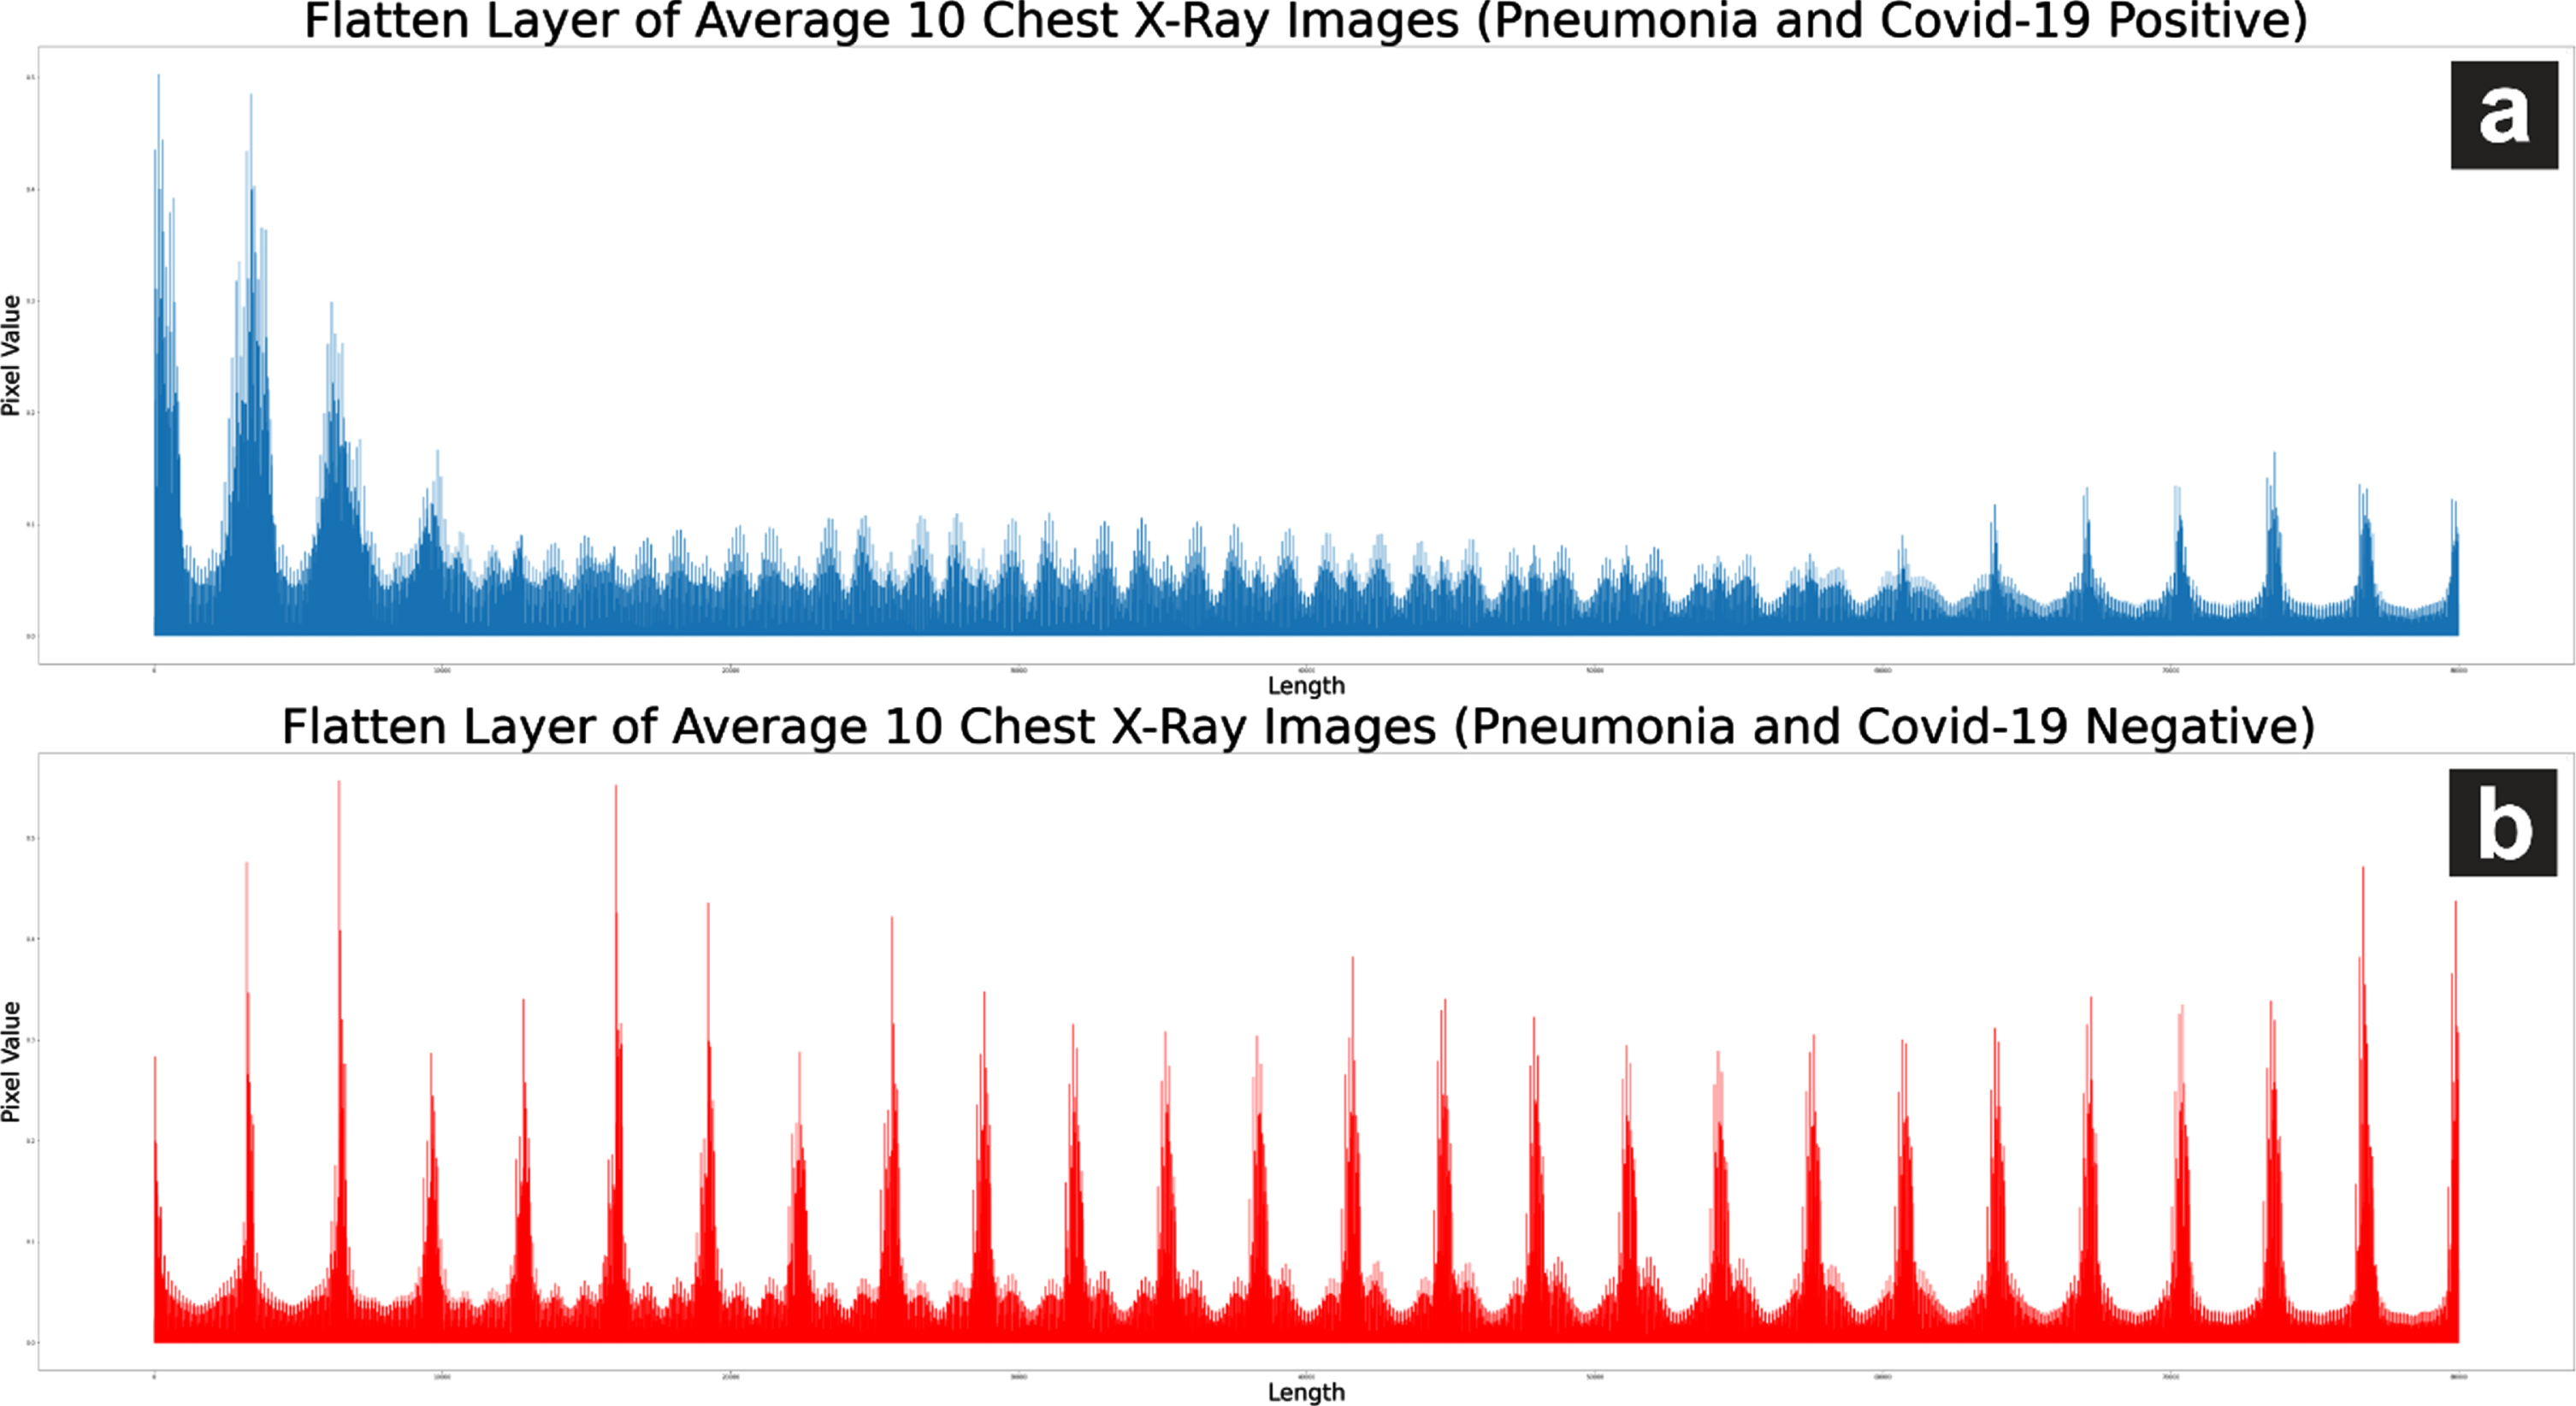 (a) an average of 10 chest X-ray images of viral pneumonia (positive for COVID-19) and (b) an average of 10 chest x-ray images for viral pneumonia (negative for COVID-19).